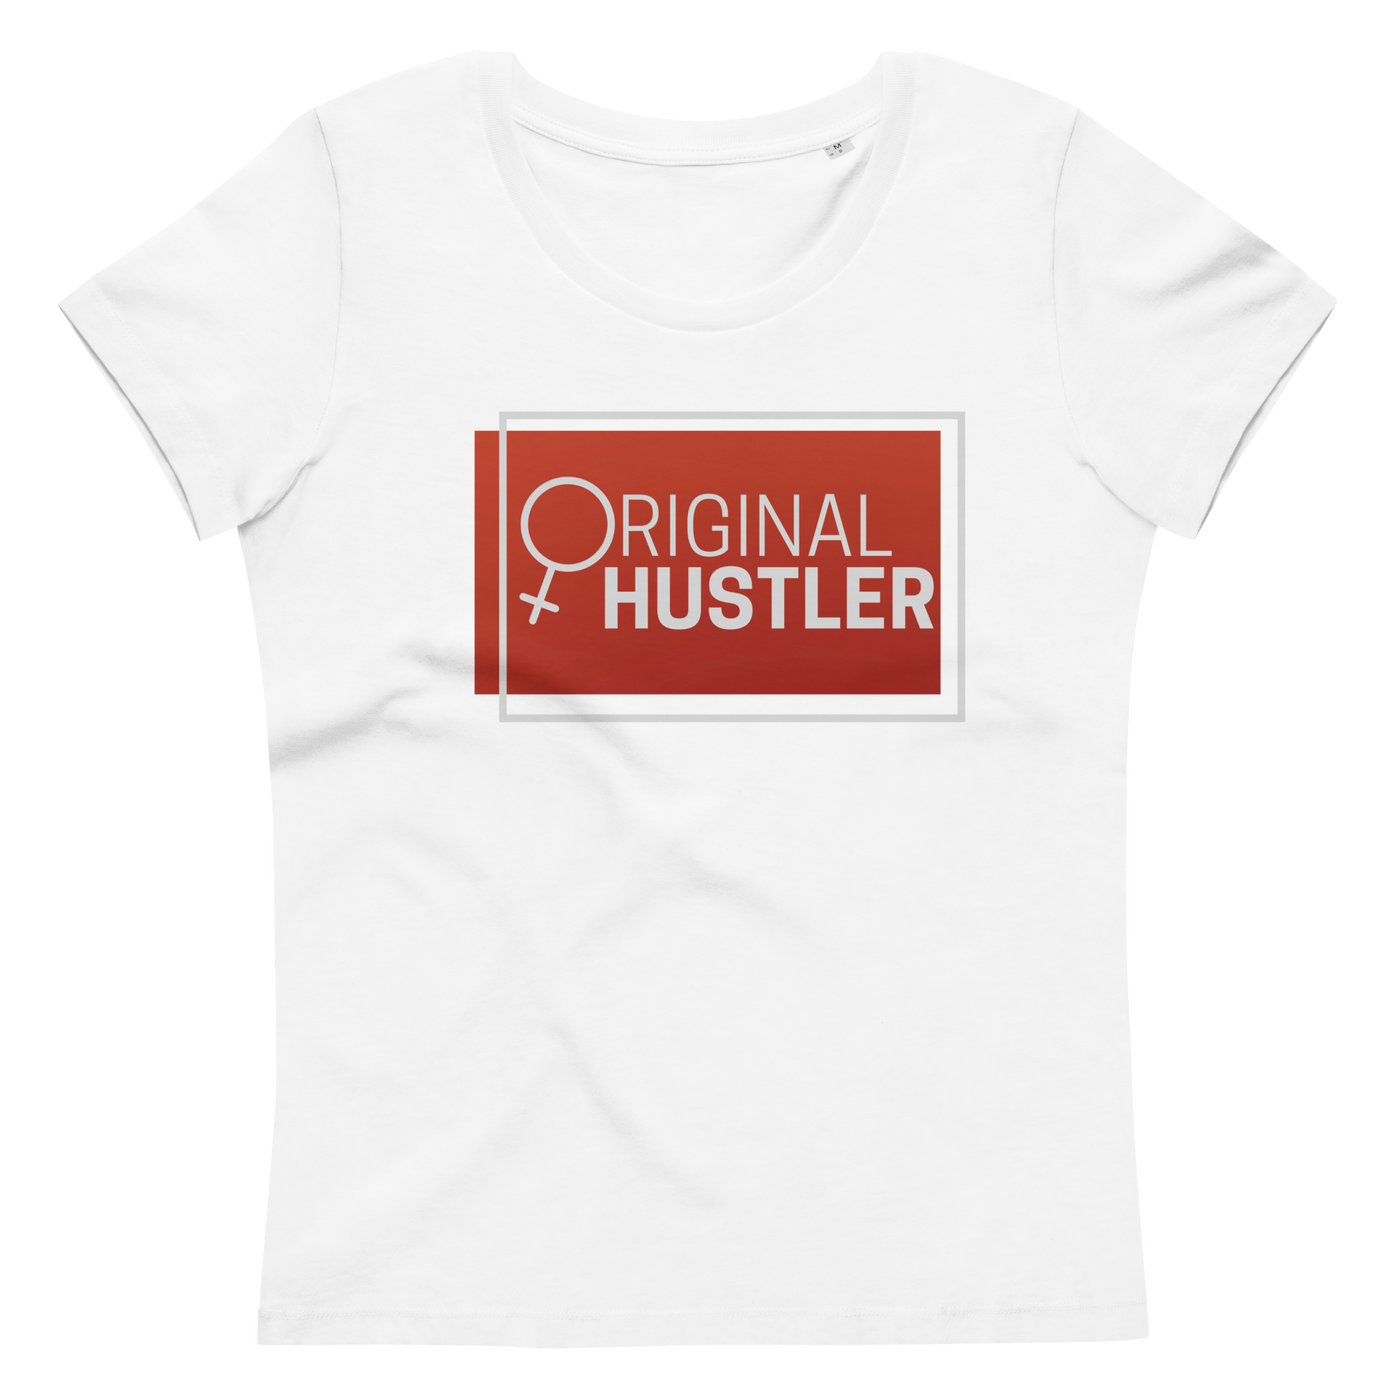 Get trendy with Women's fitted eco tee - Original Hustler -  available at SWCH Store. Grab yours for £22.50 today!